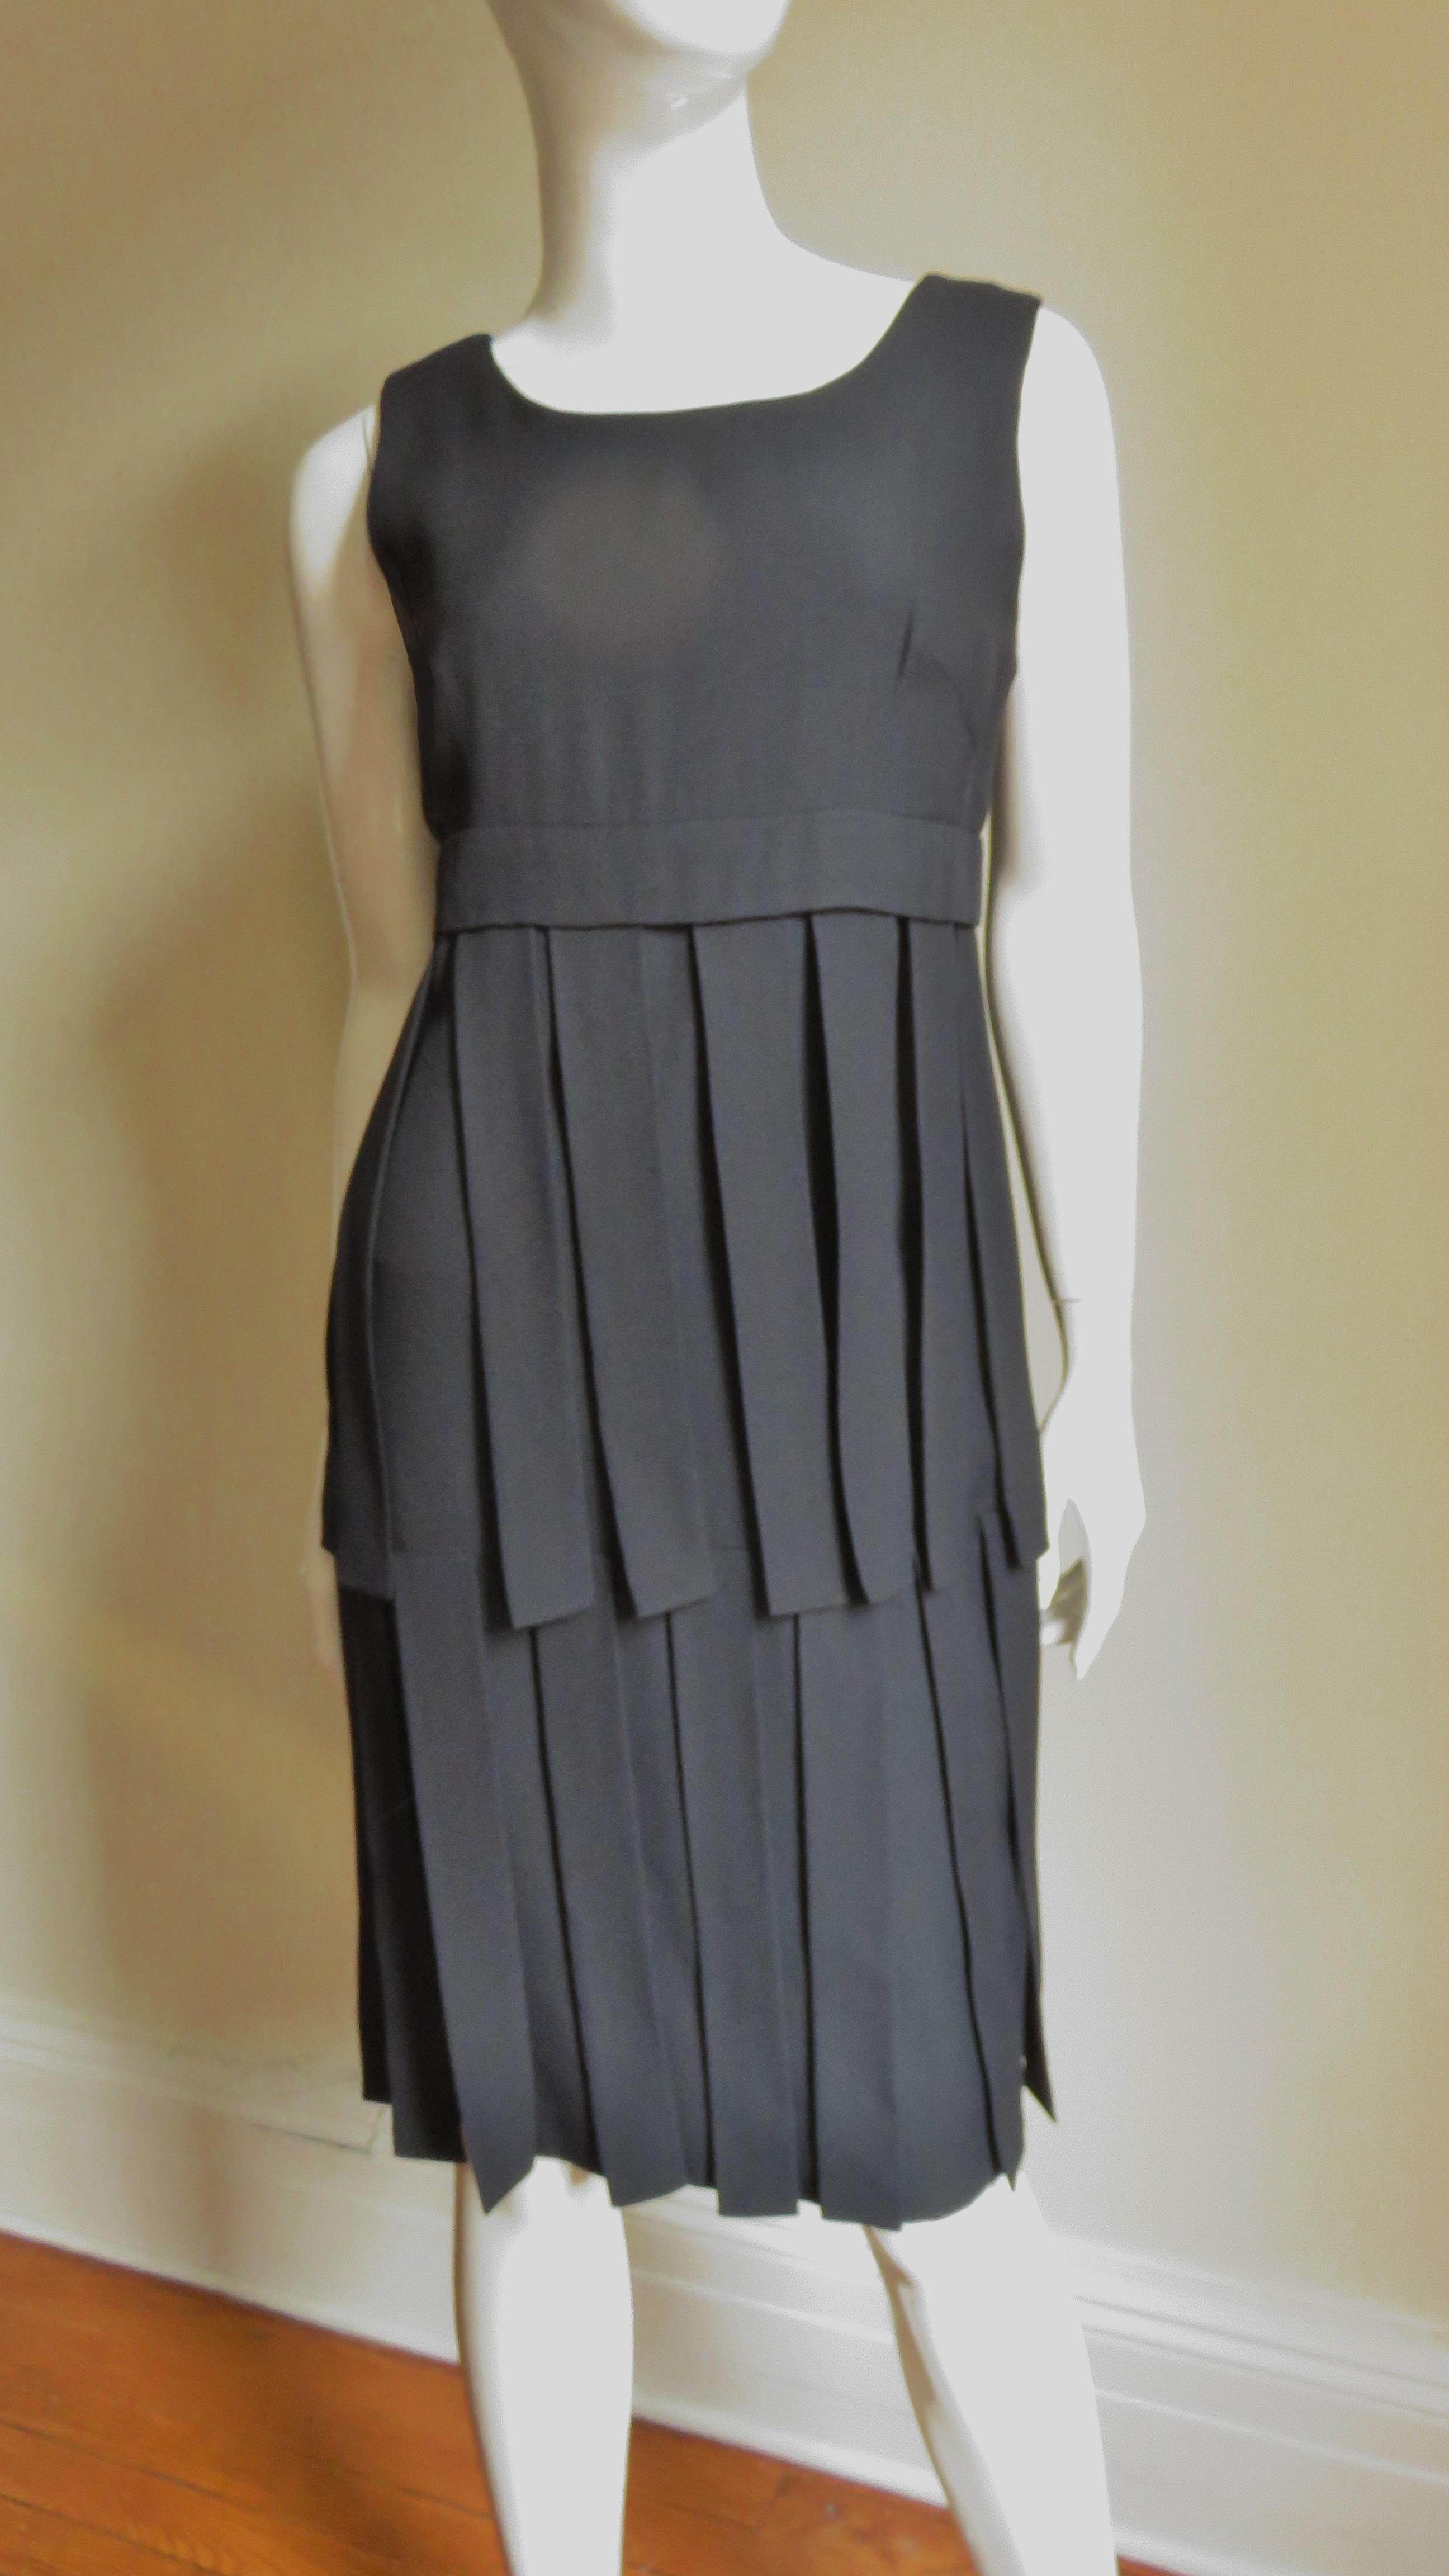 Eloise Curtis 1960s Double Car-wash Dress In Good Condition For Sale In Water Mill, NY